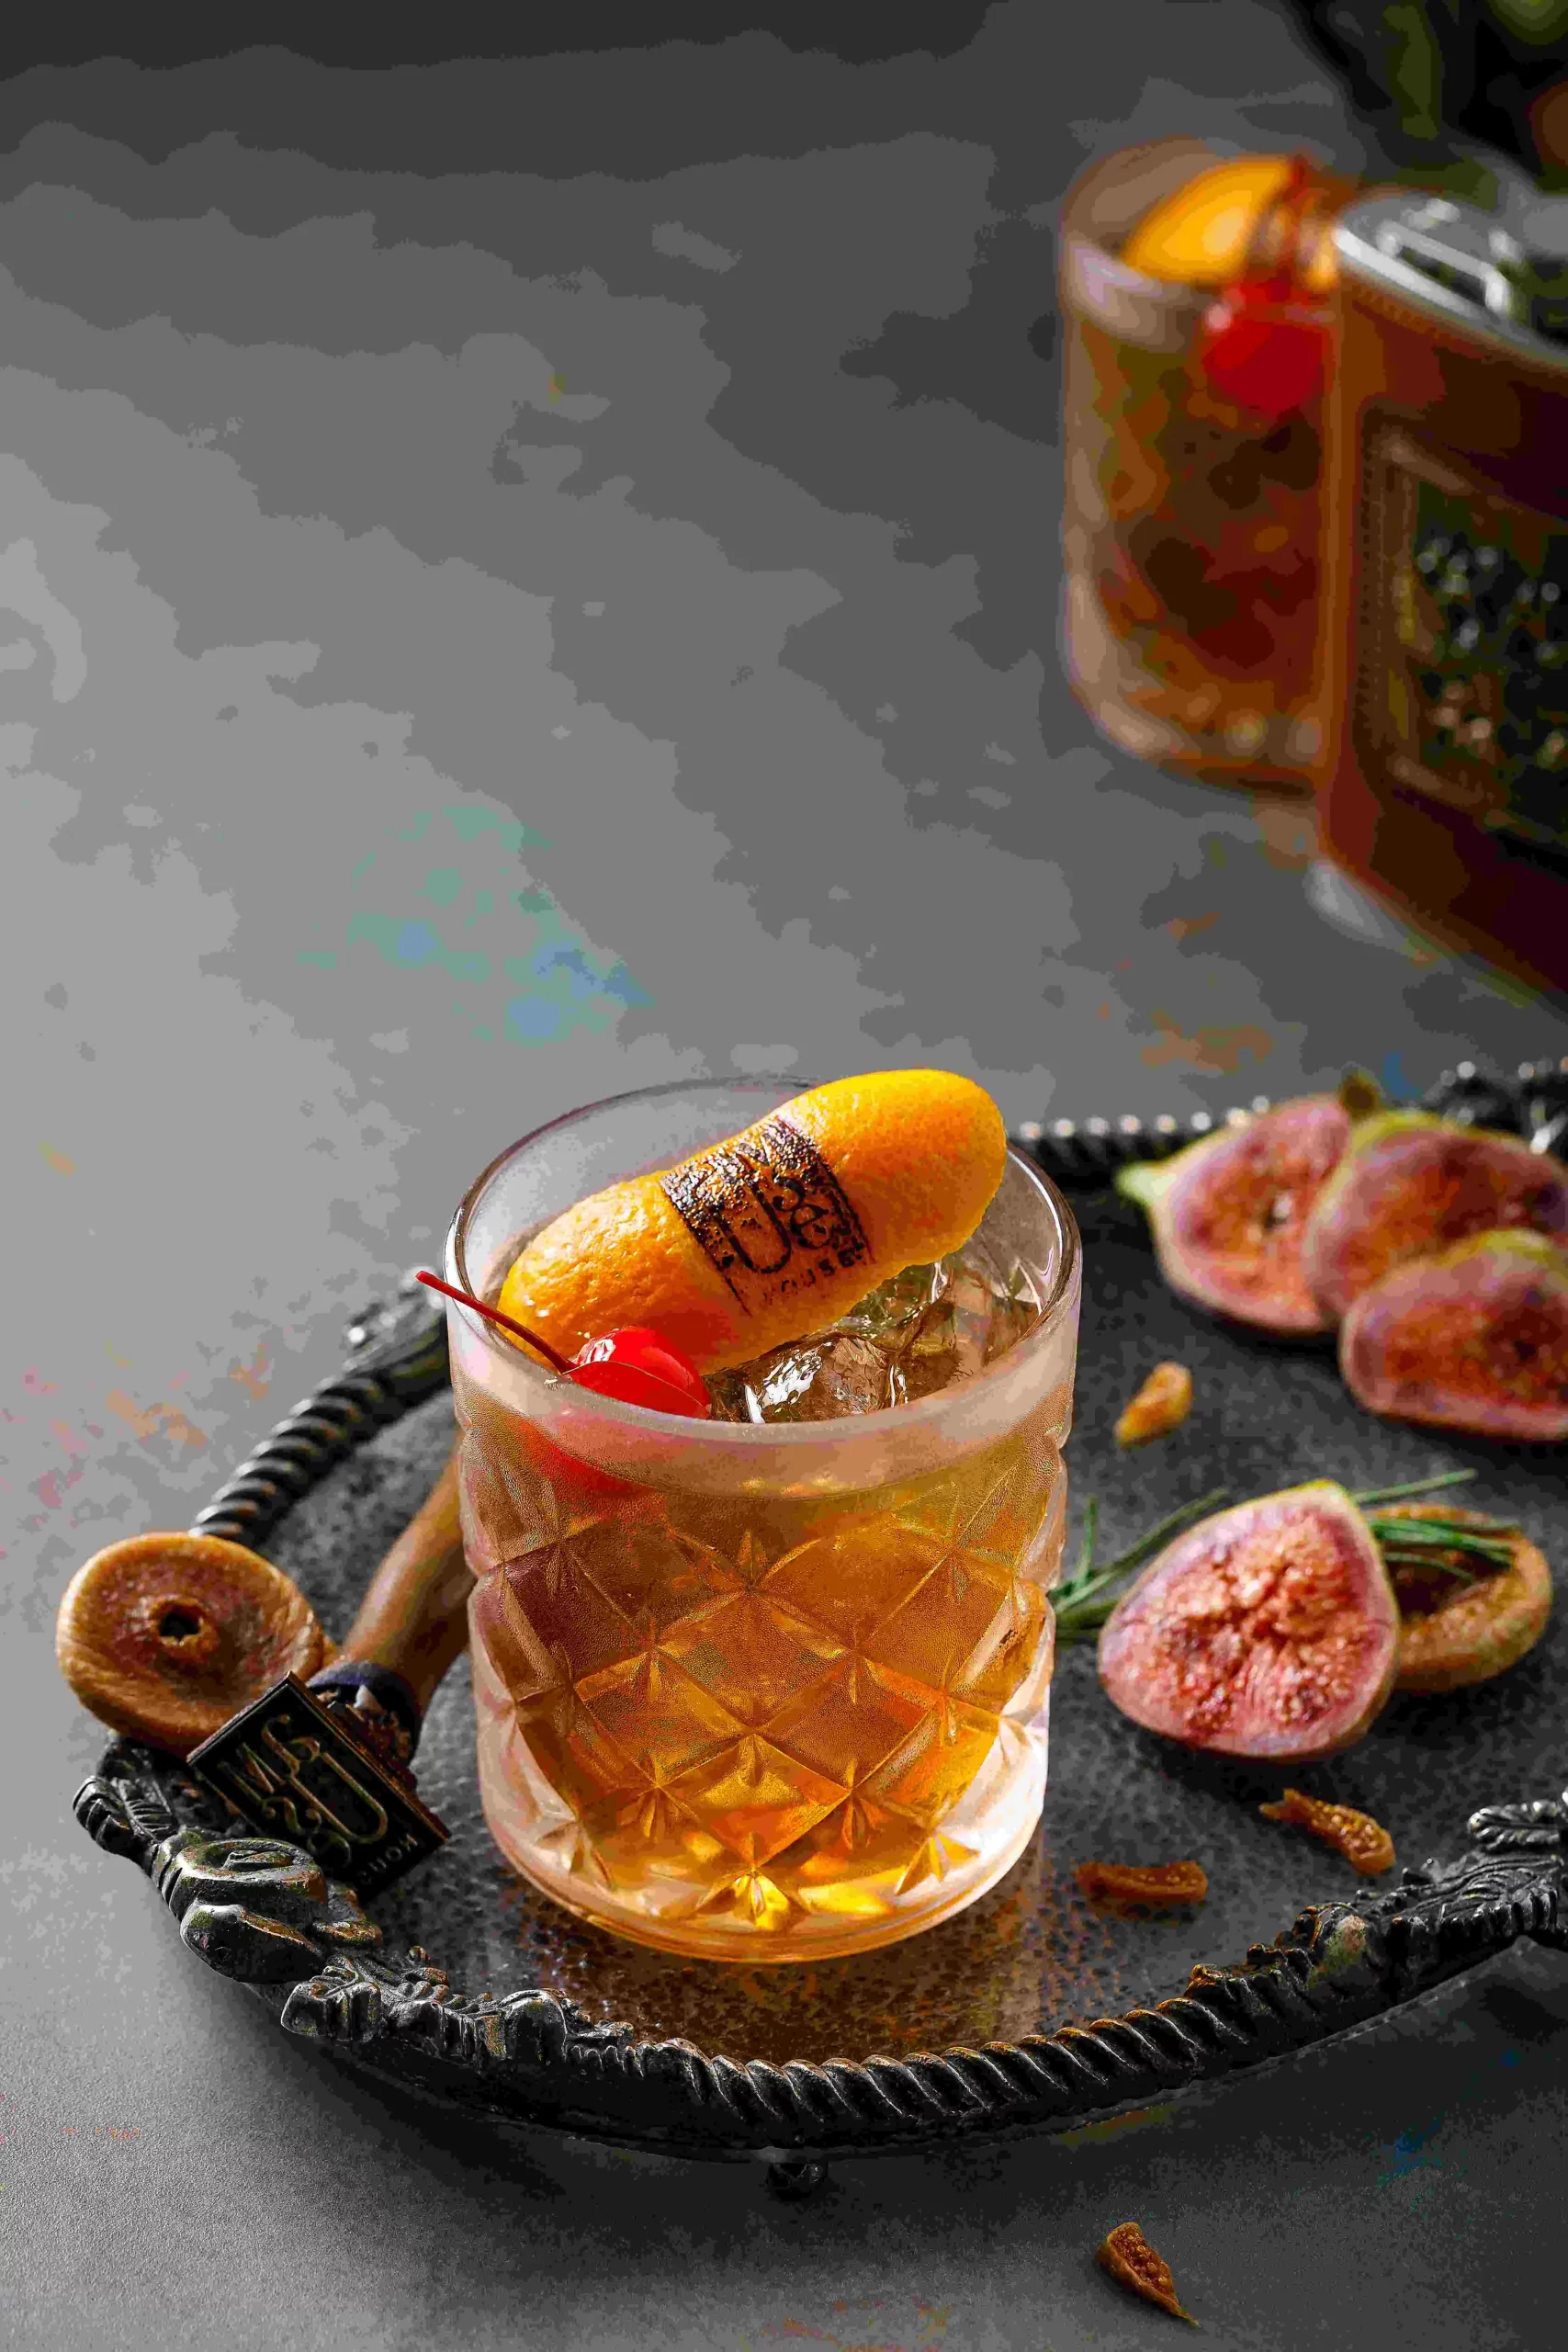 A cocktail with figs and oranges on a tray.